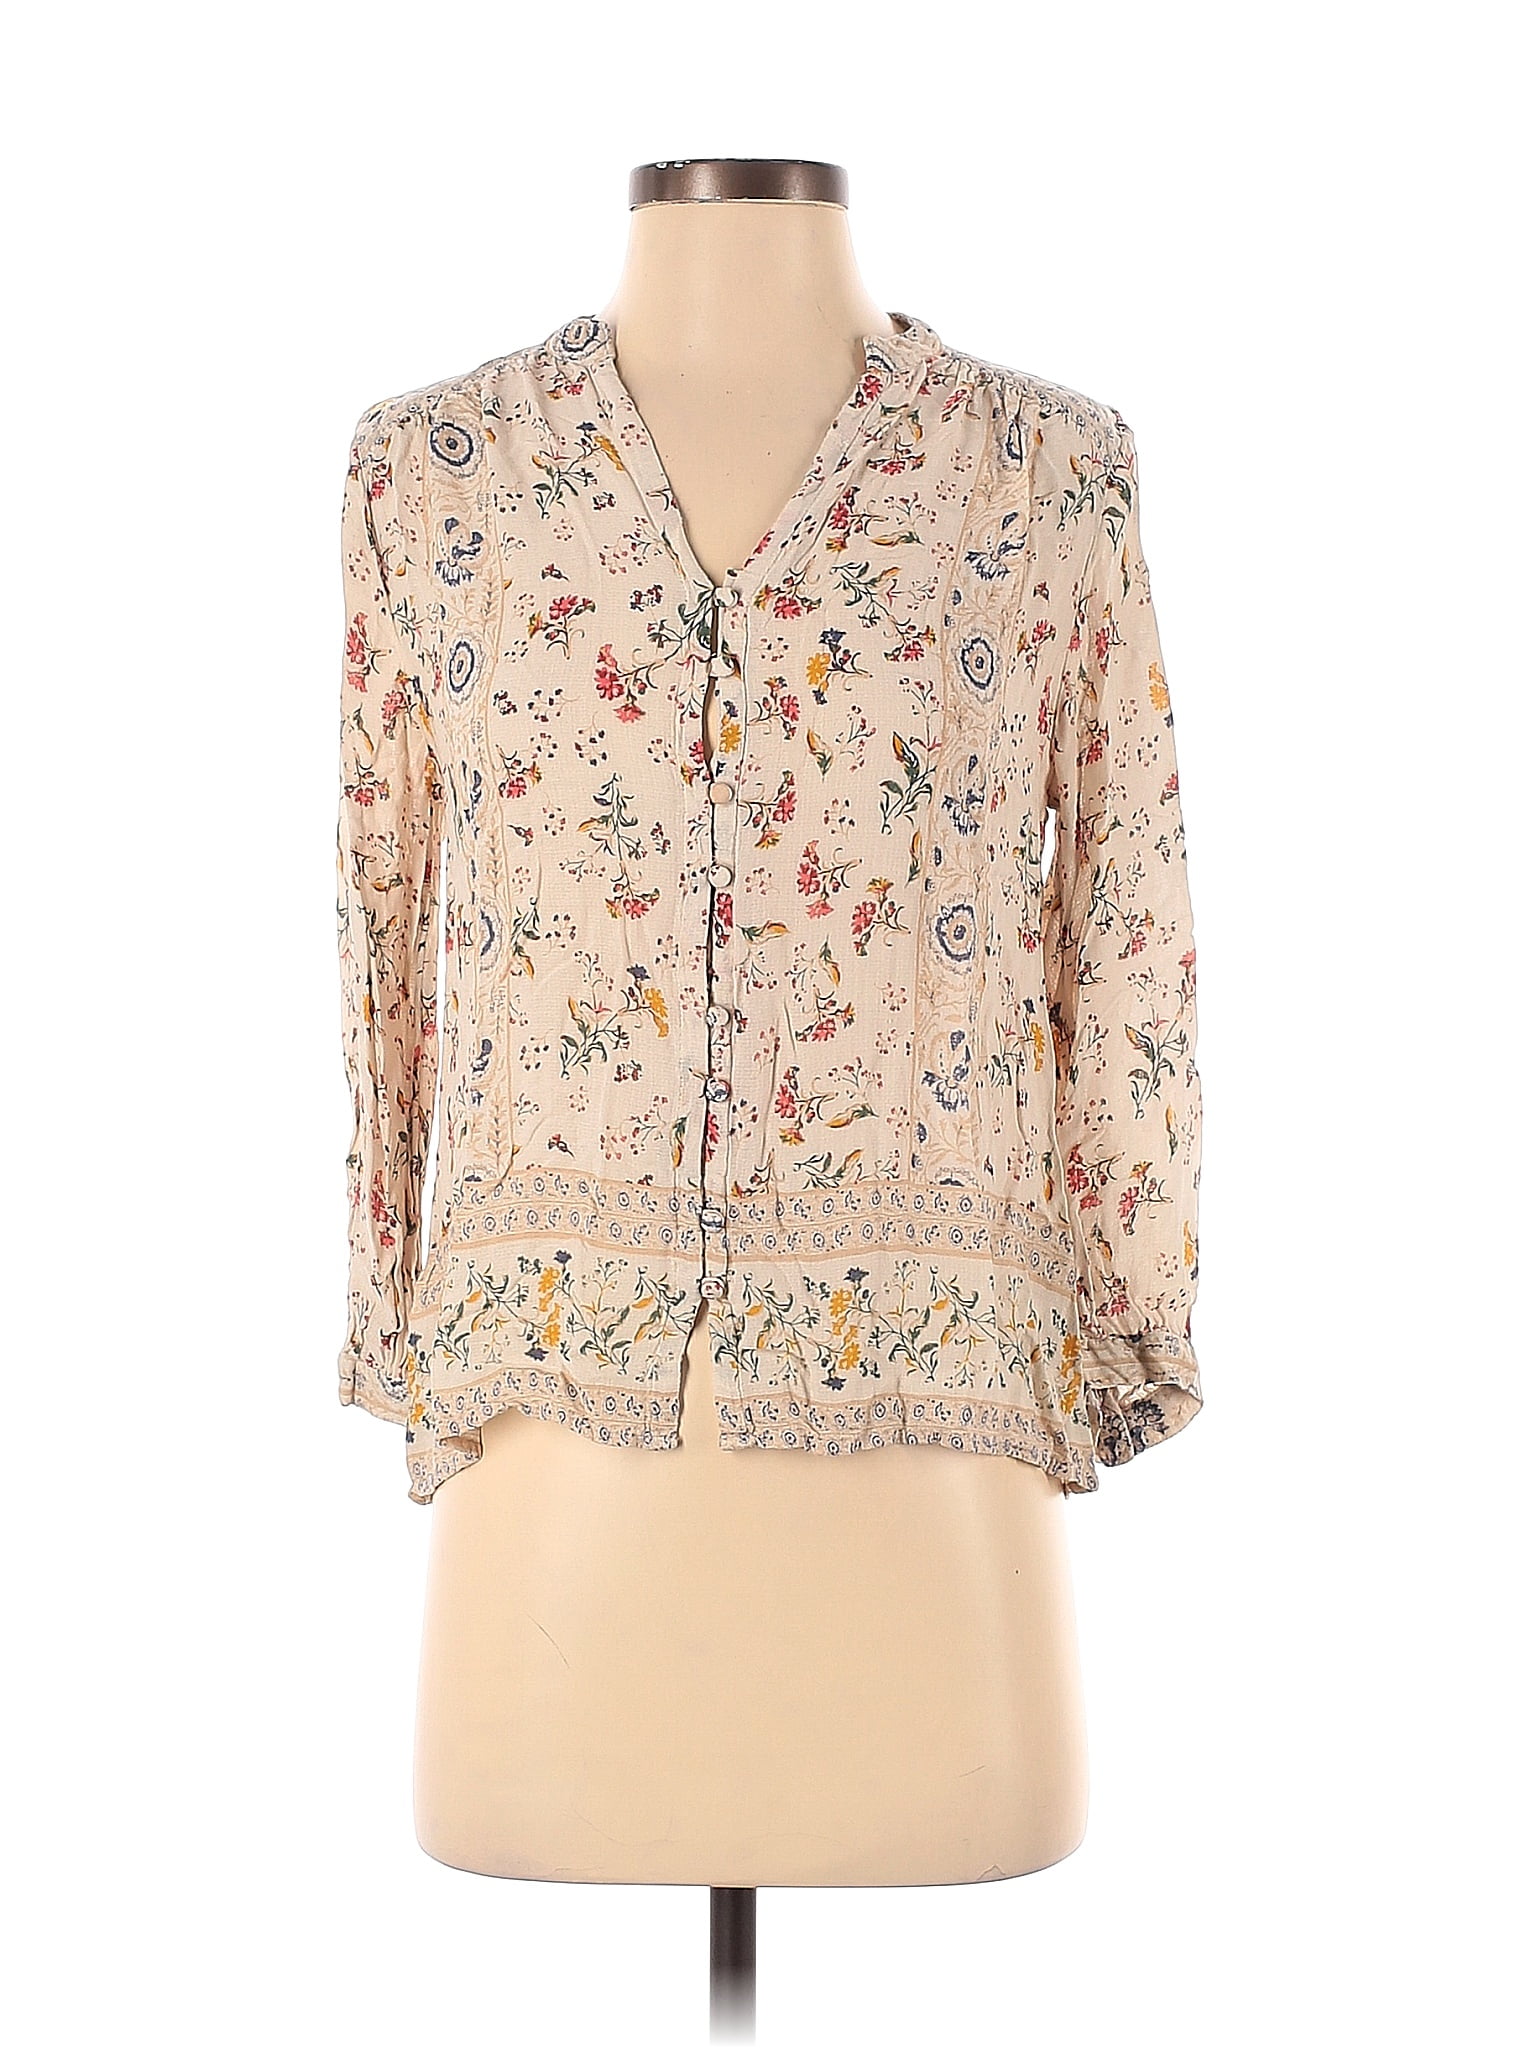 Lucky Brand 100% Viscose Floral Ivory Long Sleeve Blouse Size 3X